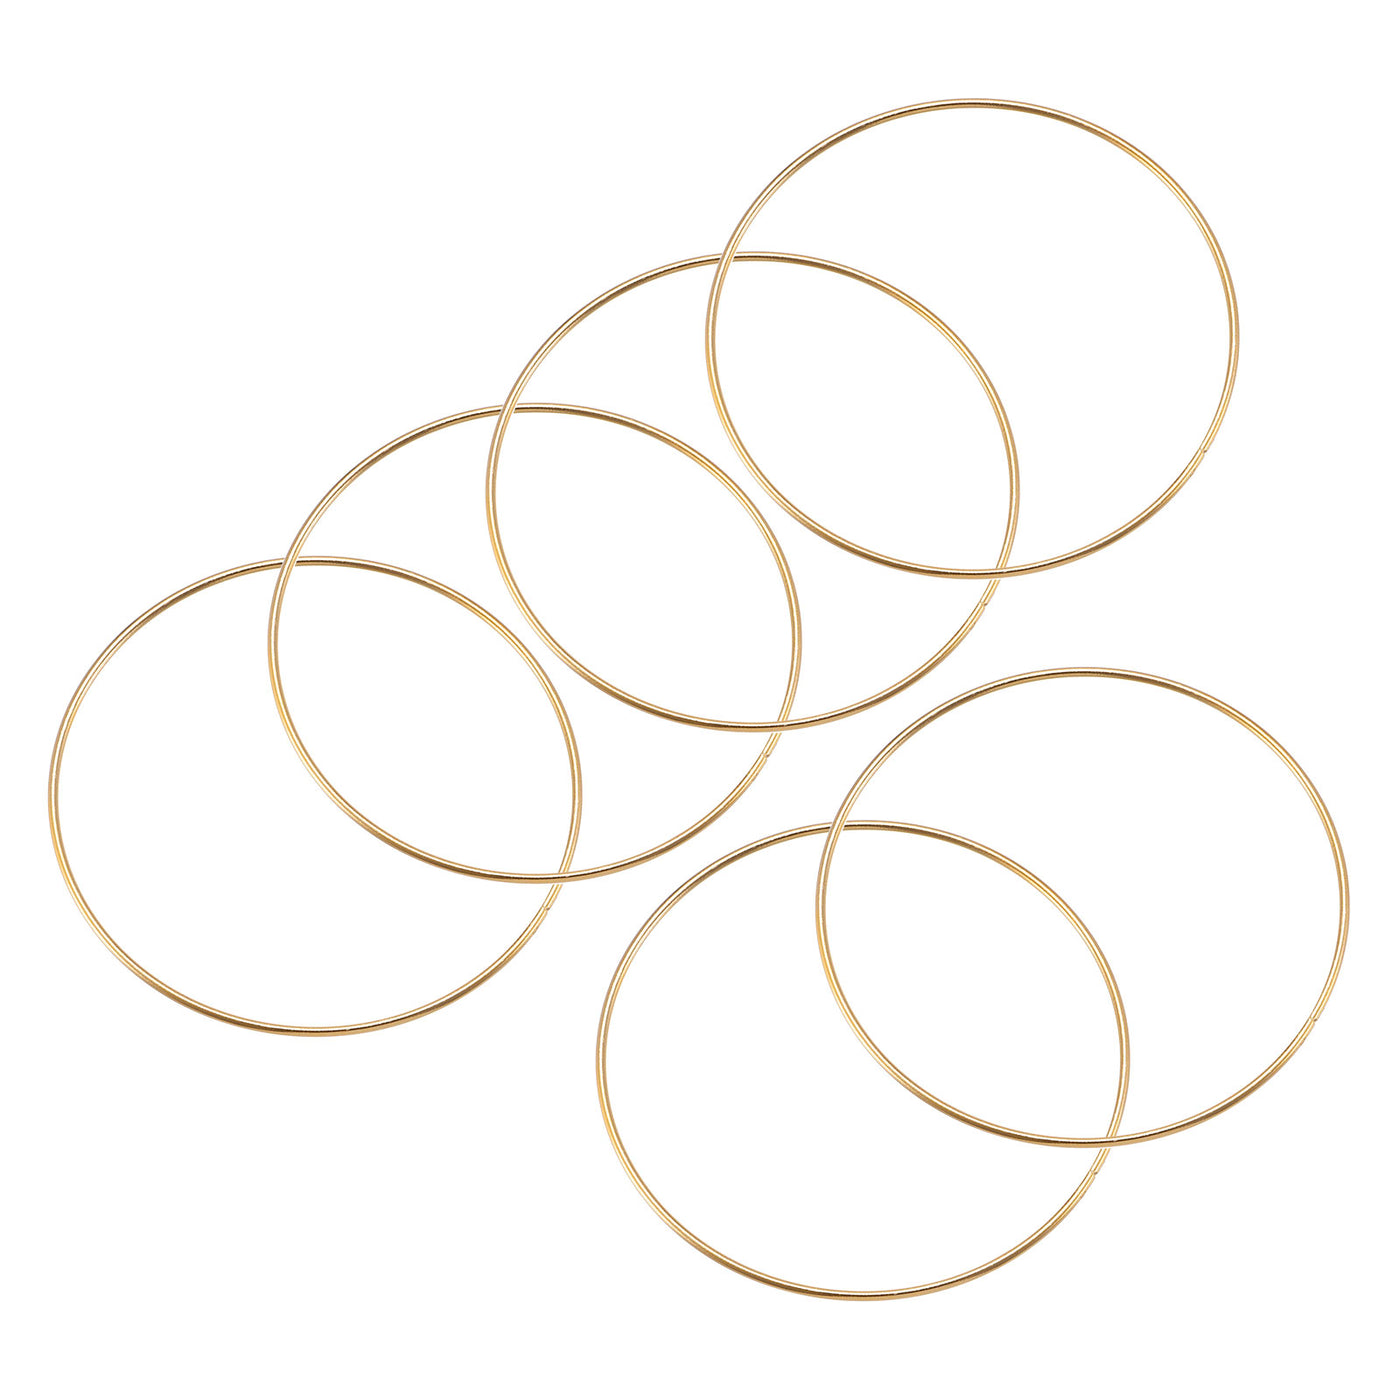 uxcell Uxcell 130mm(5.12") OD Metal O Ring Non-Welded Craft Hoops for DIY Gold Tone 8pcs